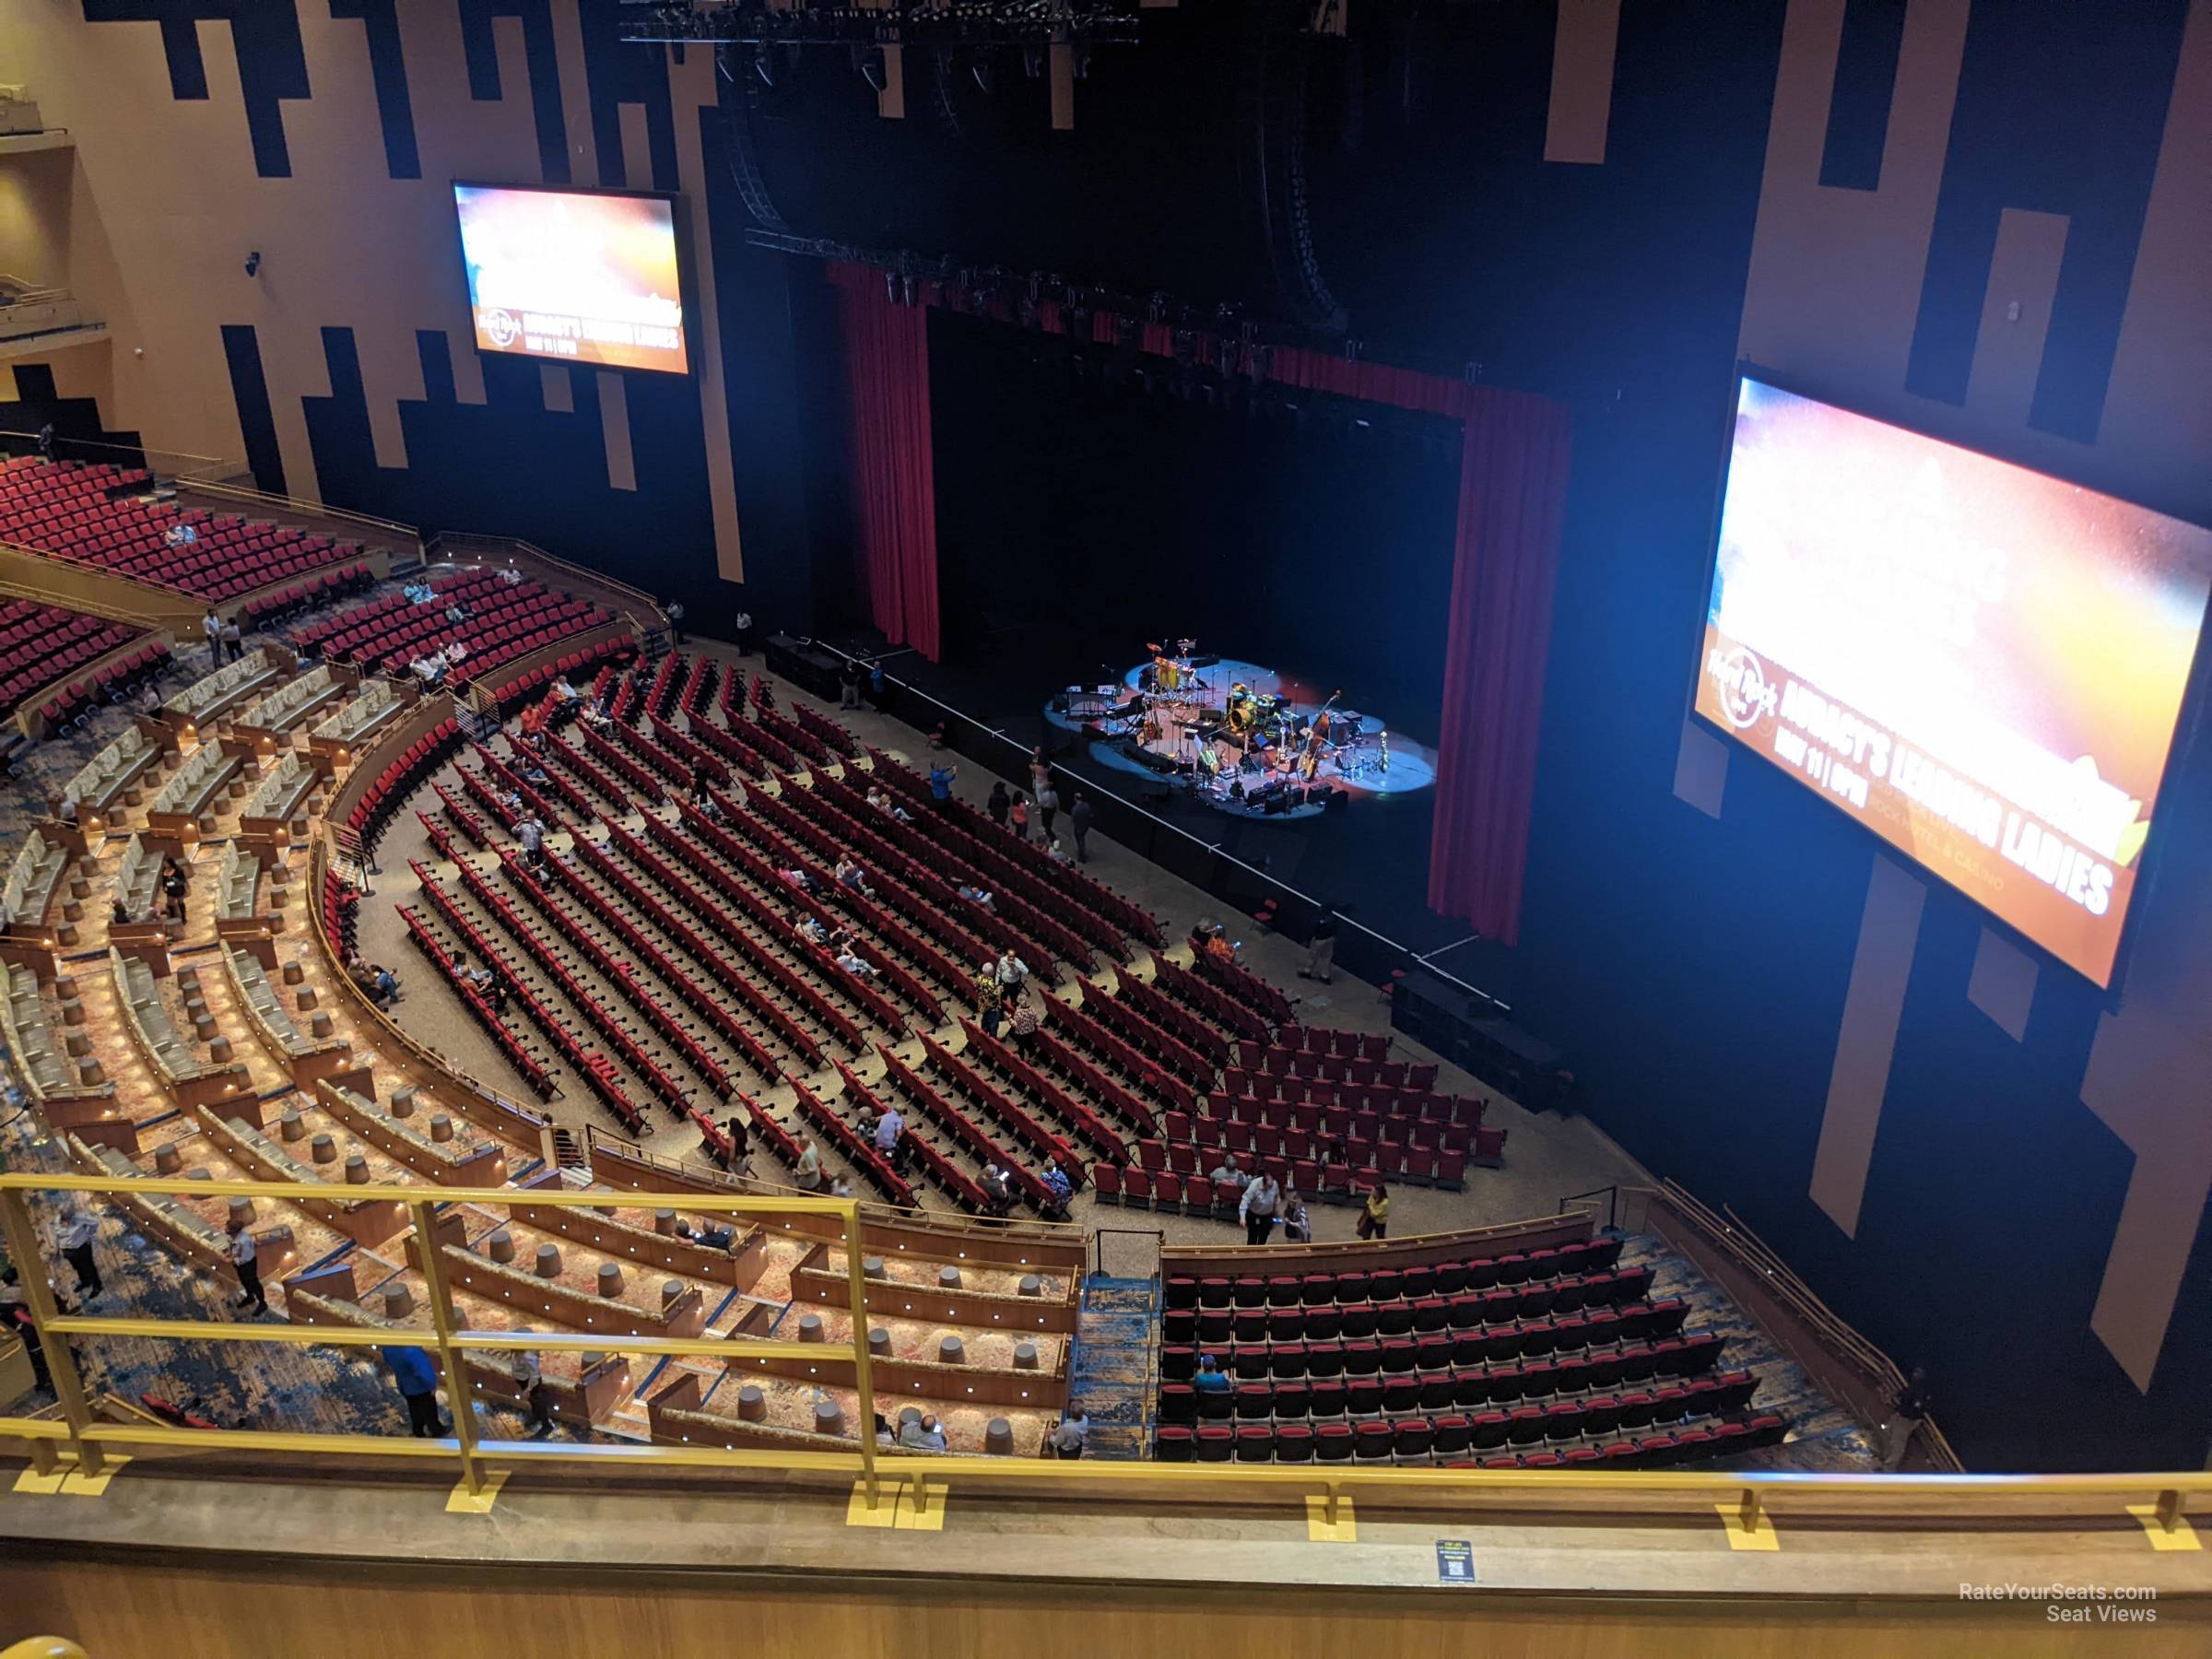 section 301, row d seat view  - hard rock live hollywood